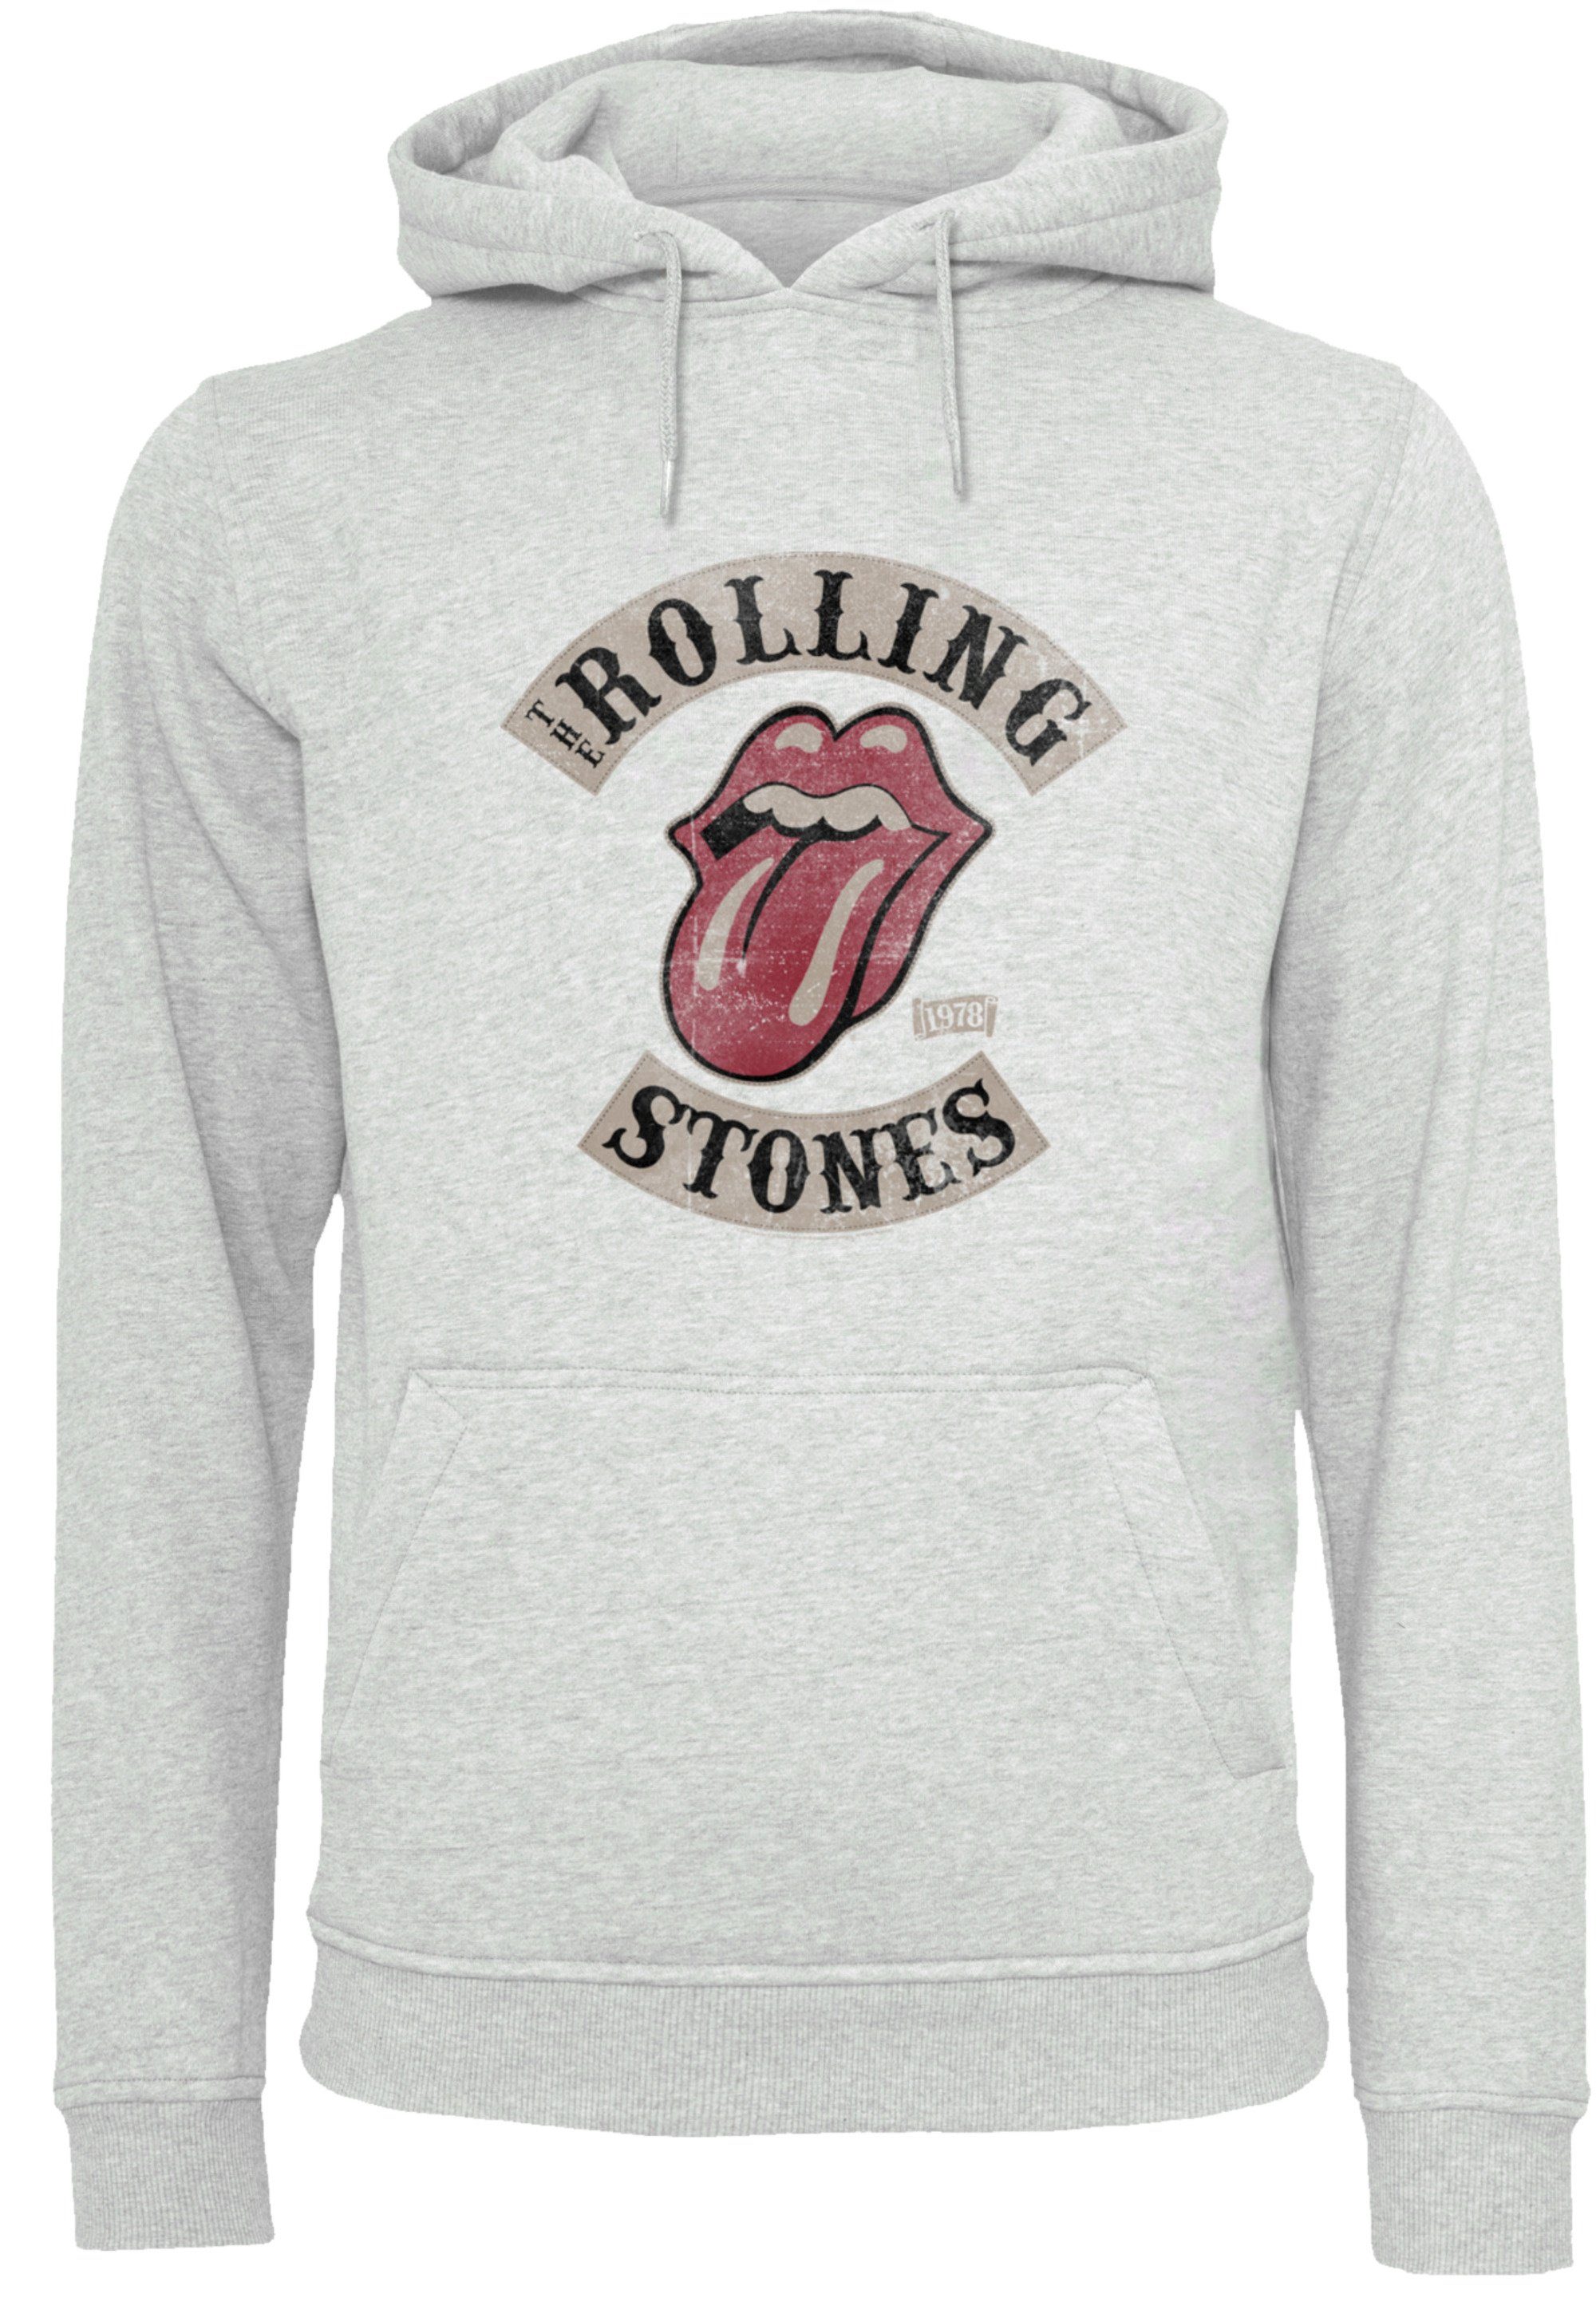 F4NT4STIC Bequem Band heather Musik grey Kapuzenpullover Stones Rock The Warm, Rolling Tour Hoodie,